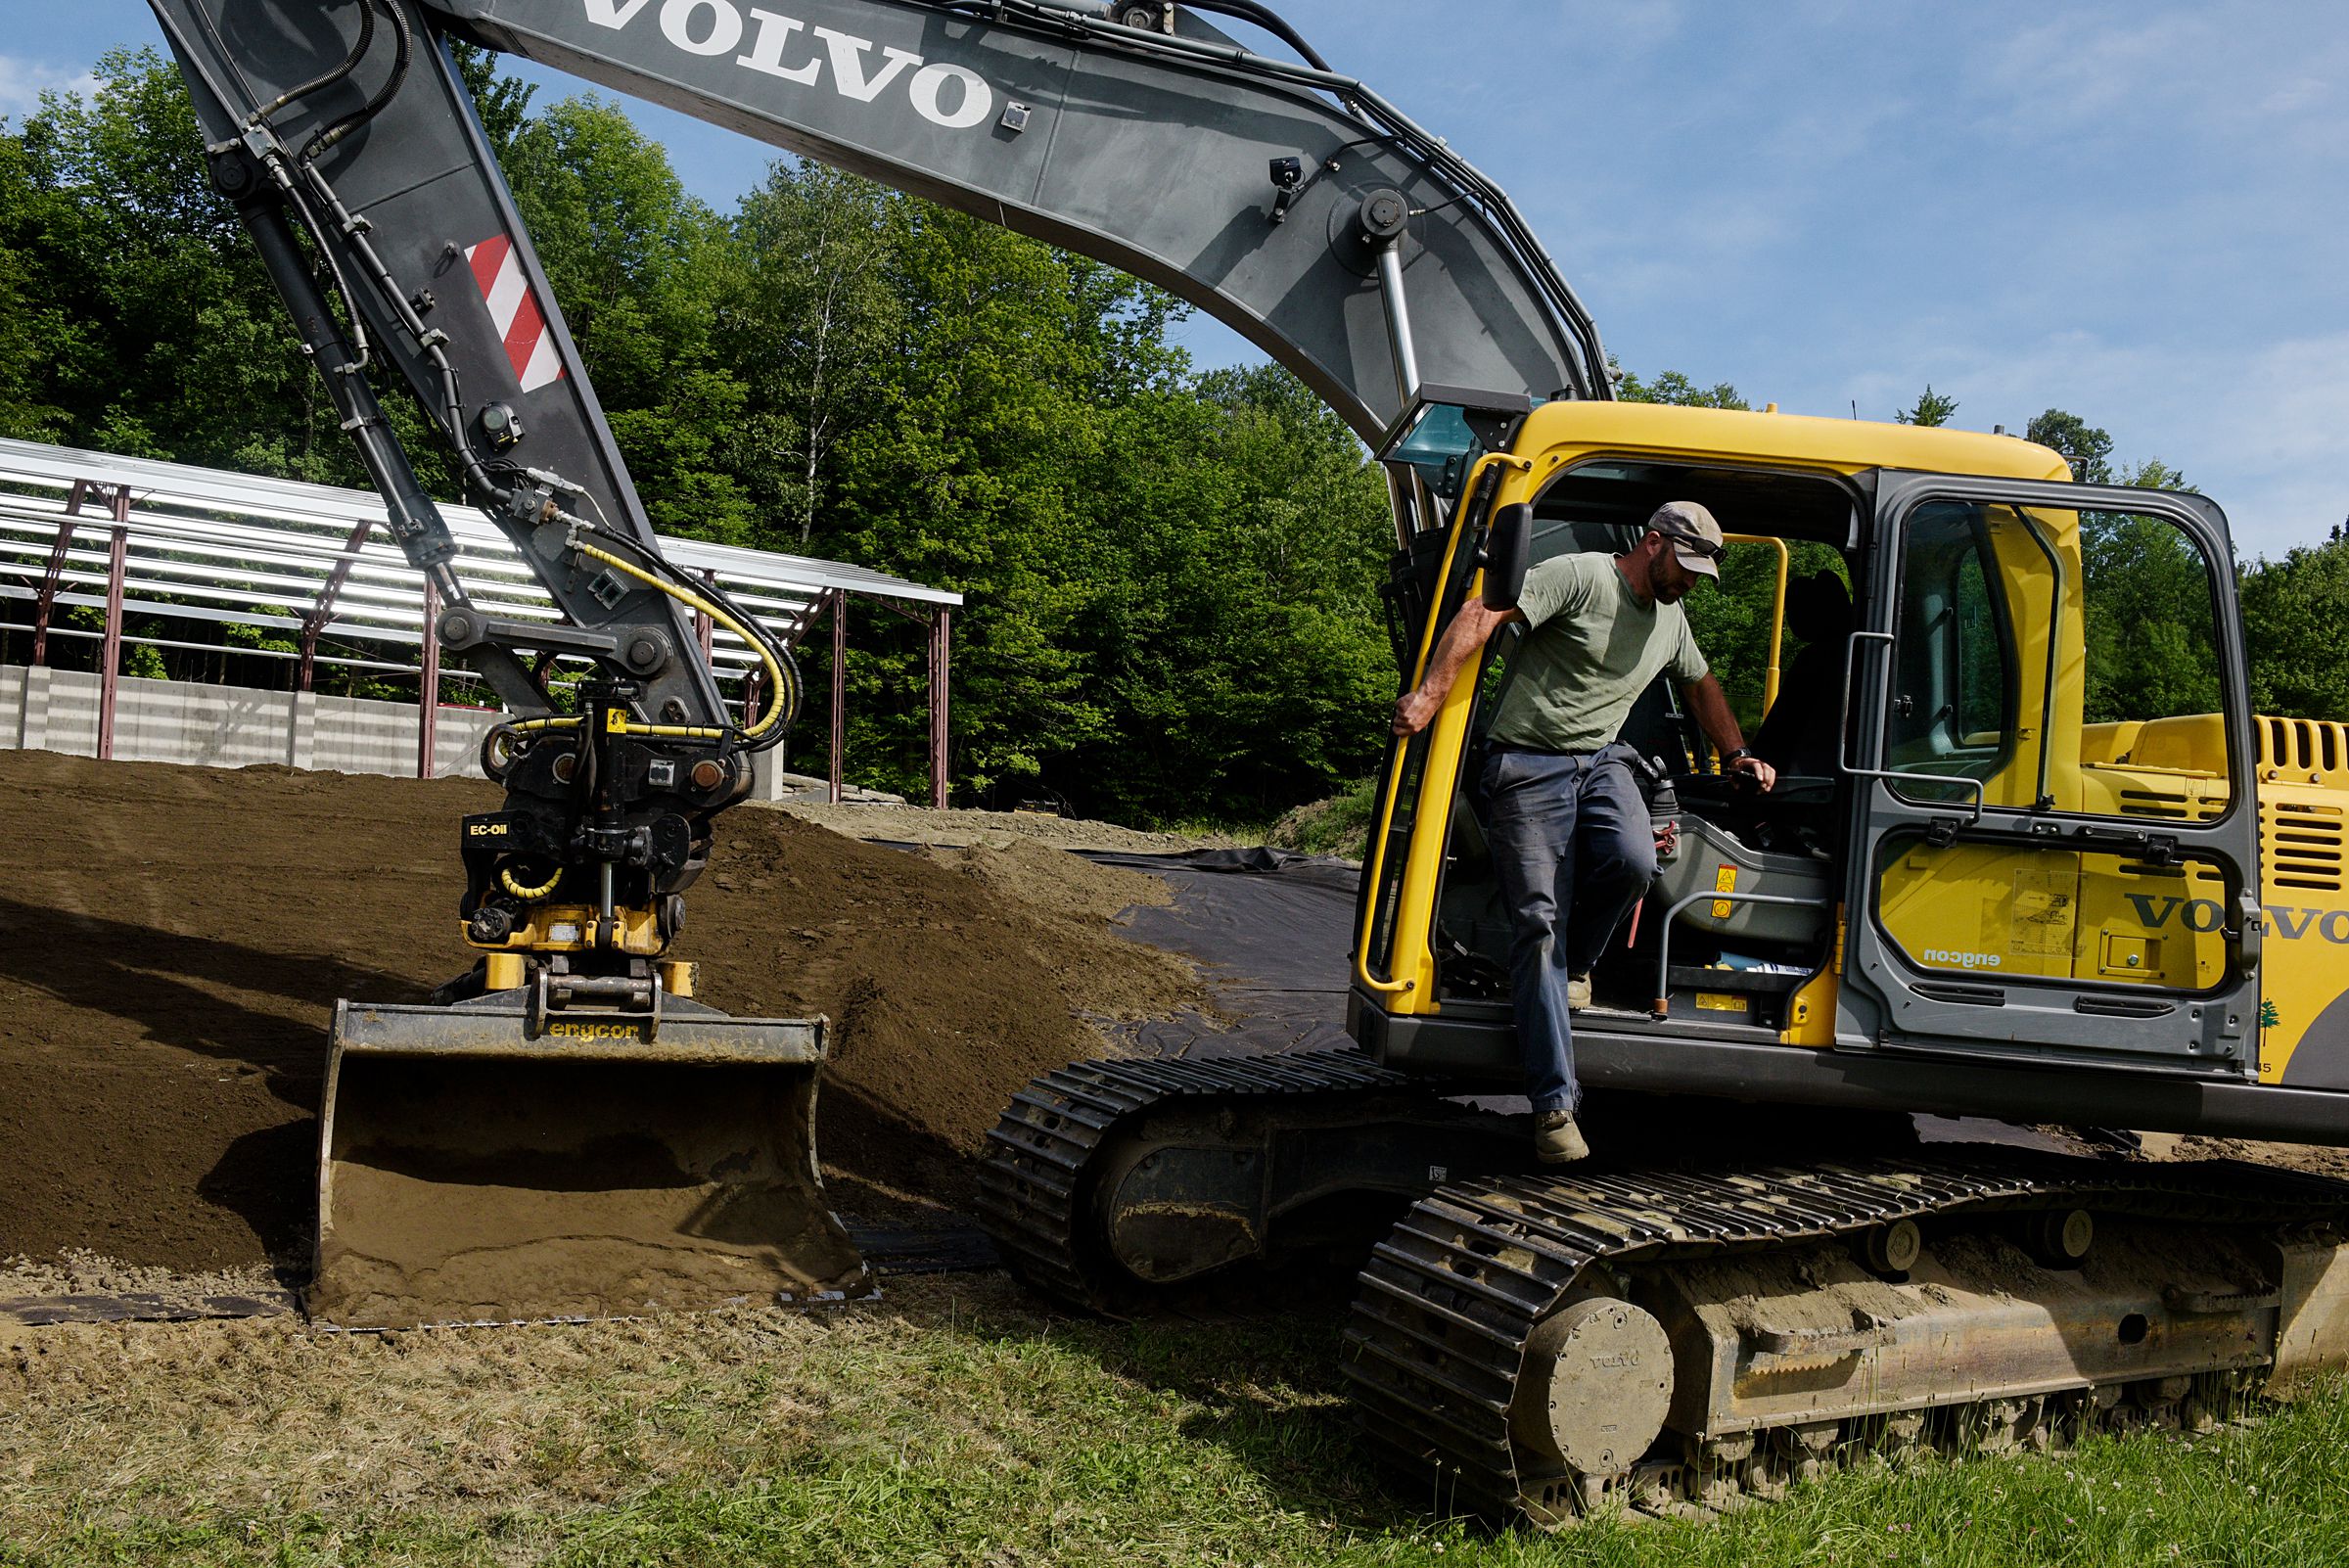 Ben Canonica, of Chelsea, steps down from his excavator after spreading a layer of topsoil on a septic system he is building as part of a new home for a client in Tunbridge, Vt., Friday, June 25, 2021. (Valley News - James M. Patterson) Copyright Valley News. May not be reprinted or used online without permission. Send requests to permission@vnews.com.